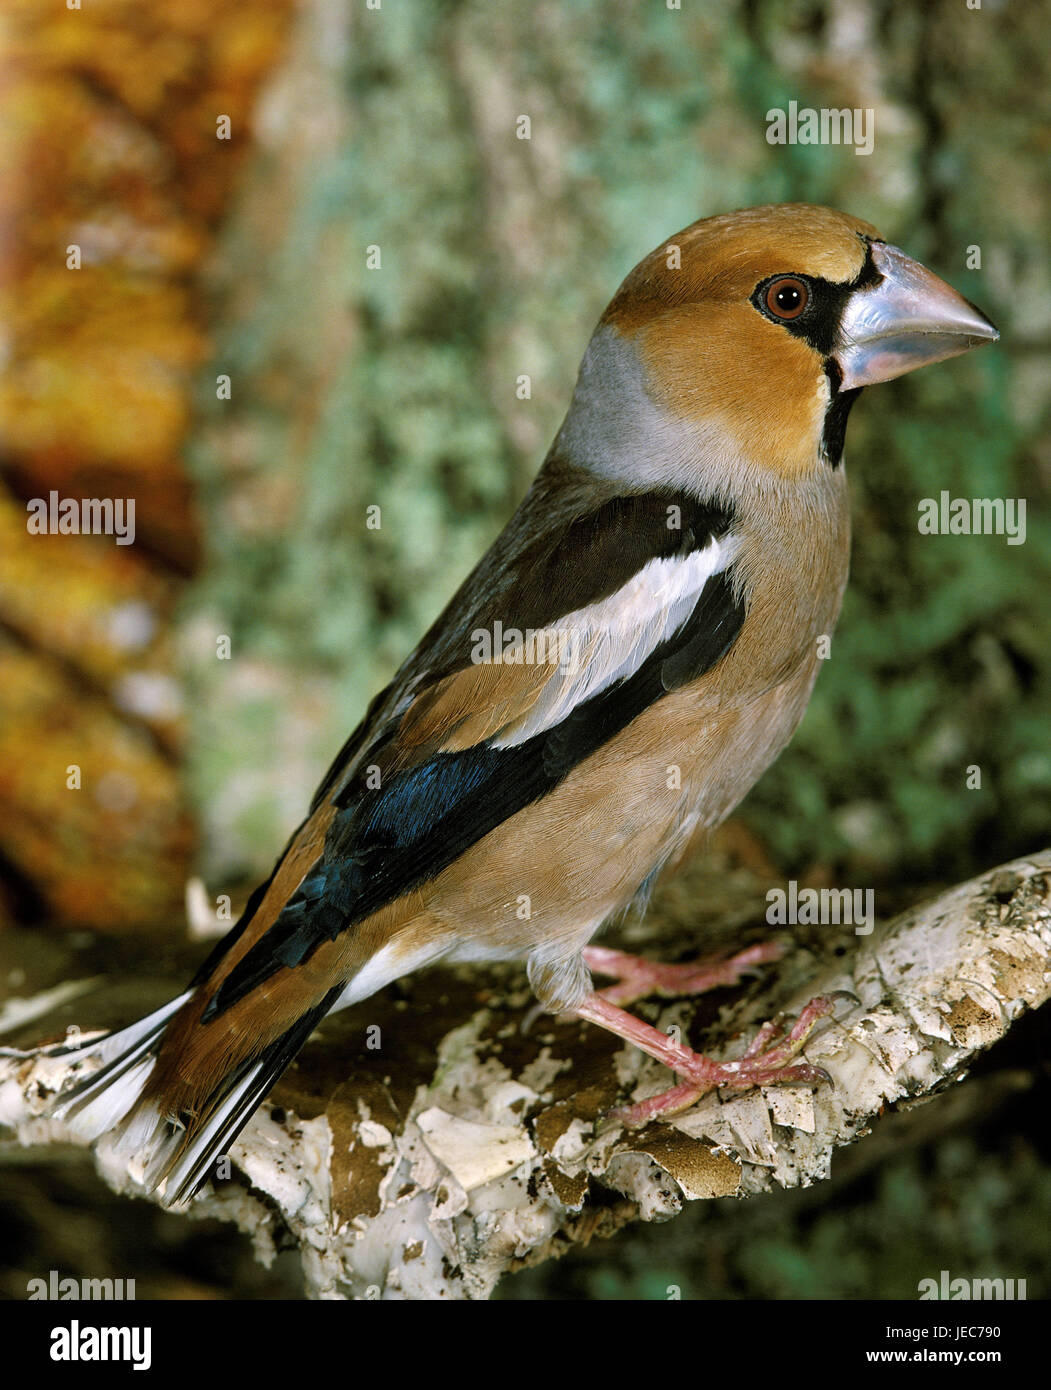 Hawfinches, Coccothraustes coccothraustes, branch, sit, Stock Photo